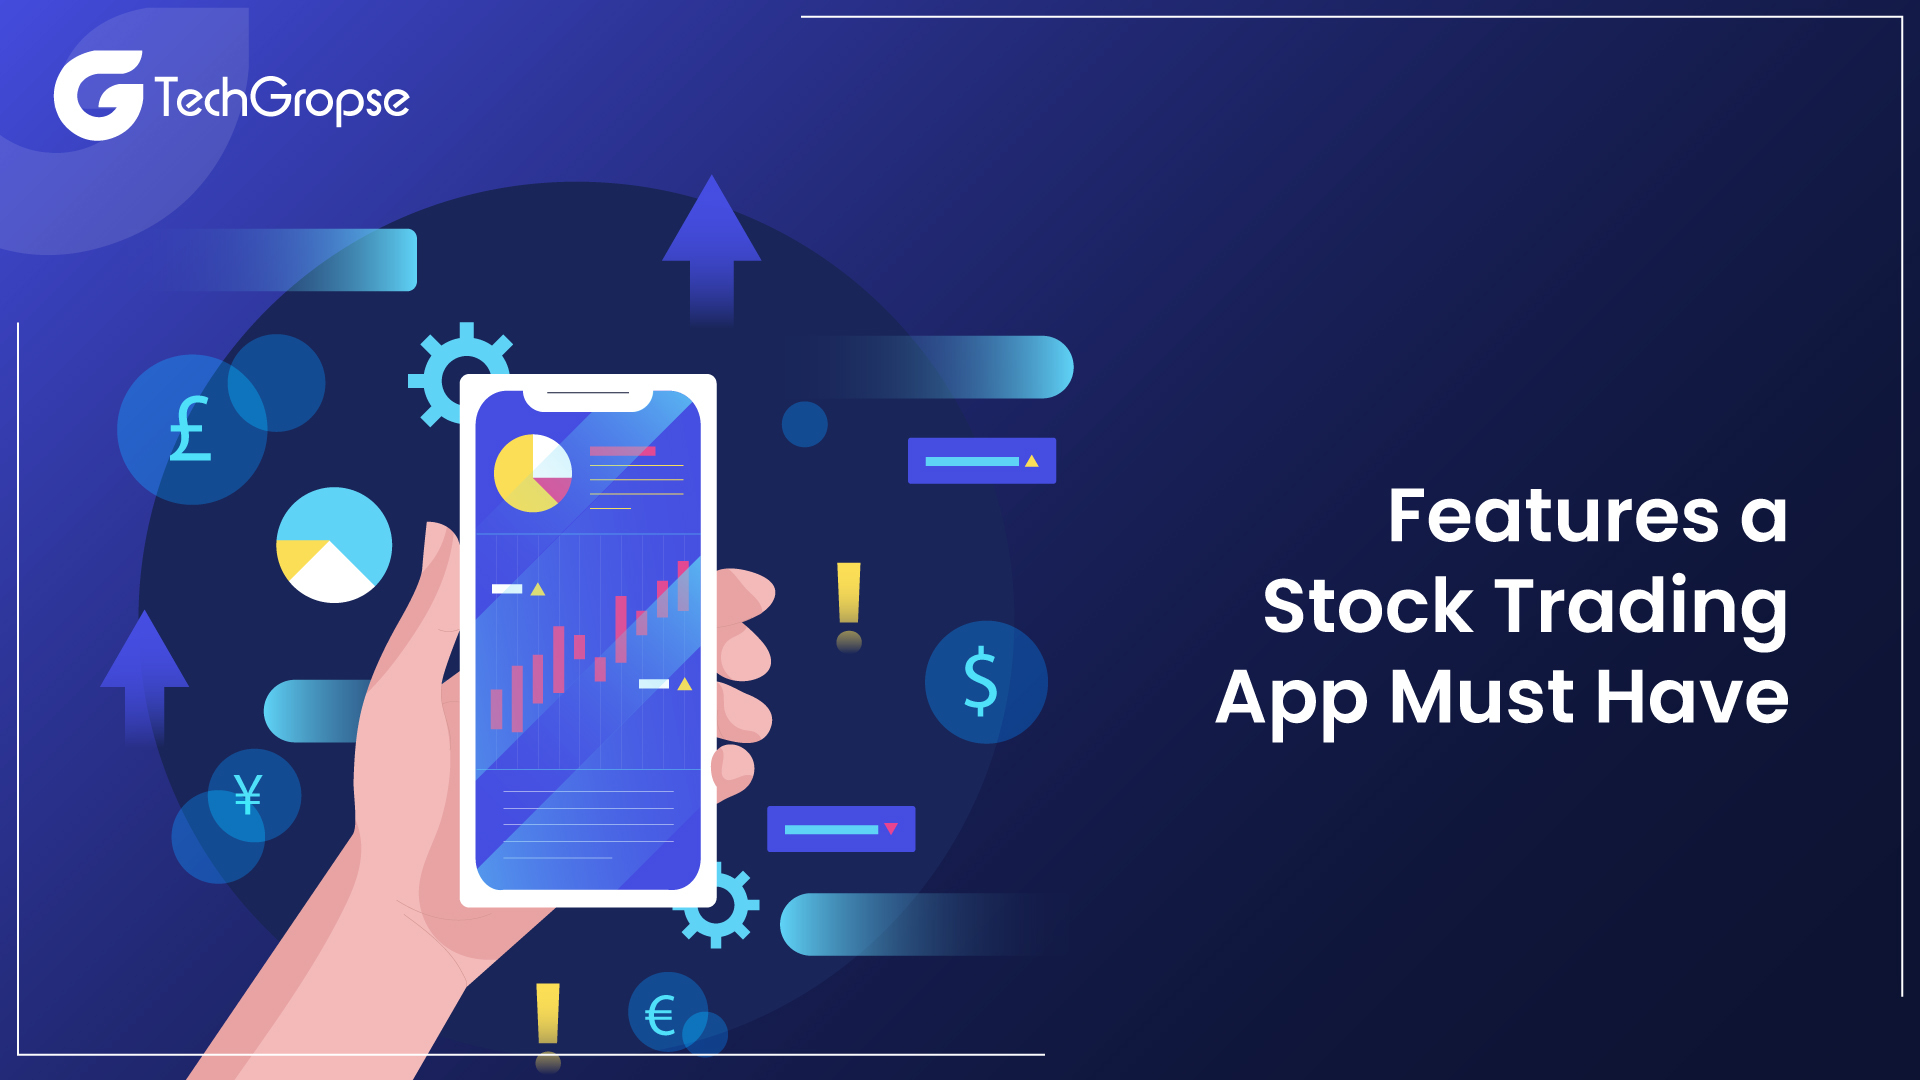 Features a Stock Trading App Must Have